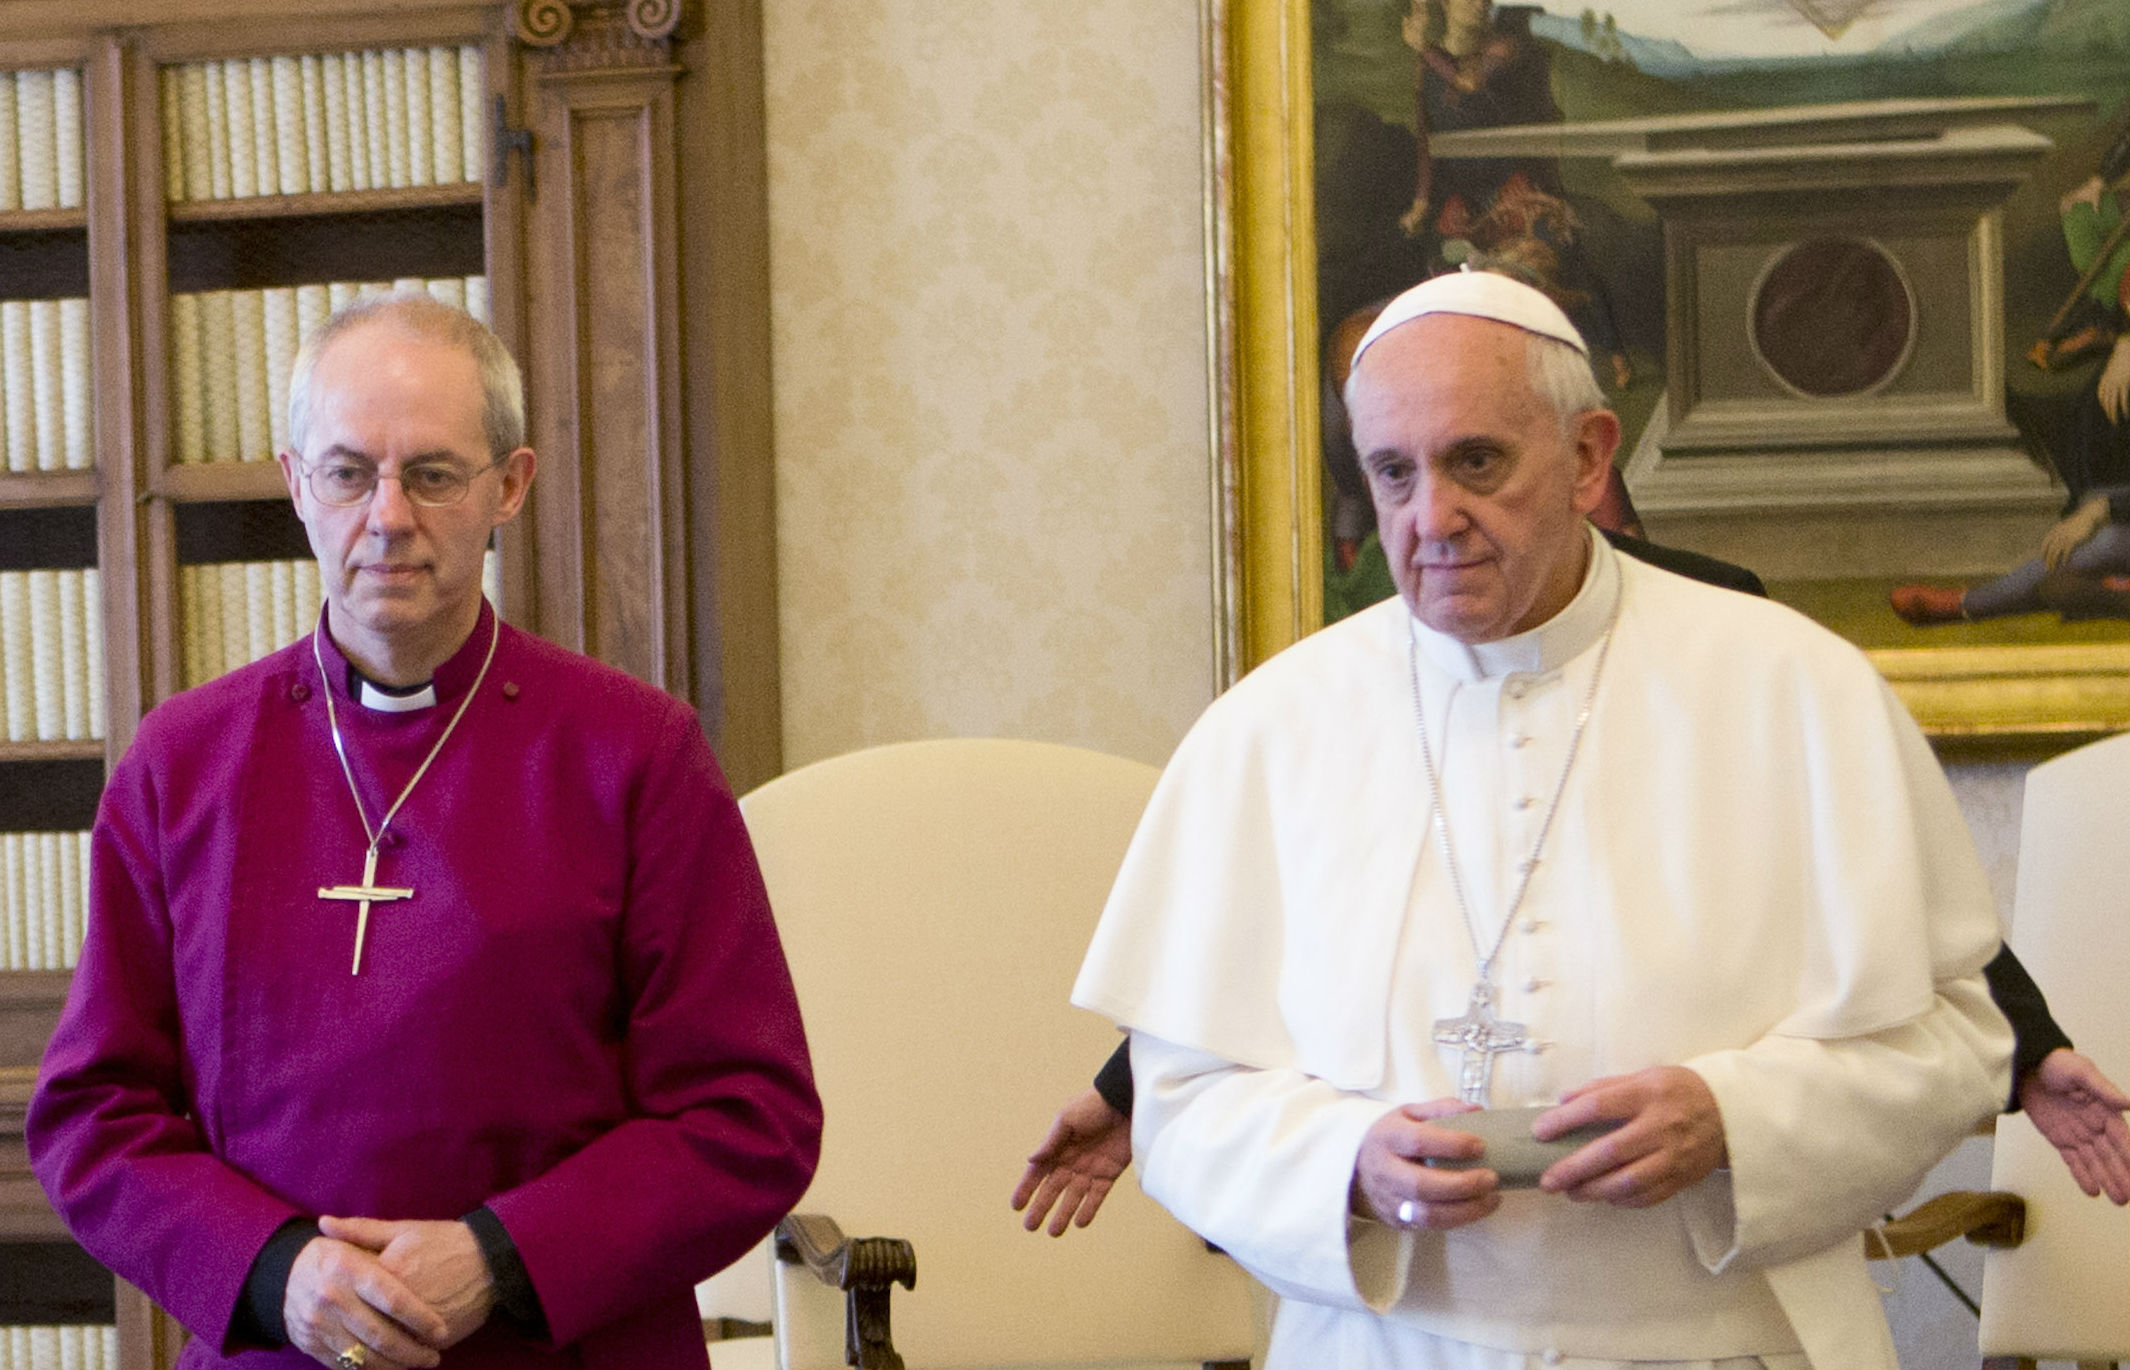 Archbishop of Canterbury and Pope Francis to meet for joint prayer service